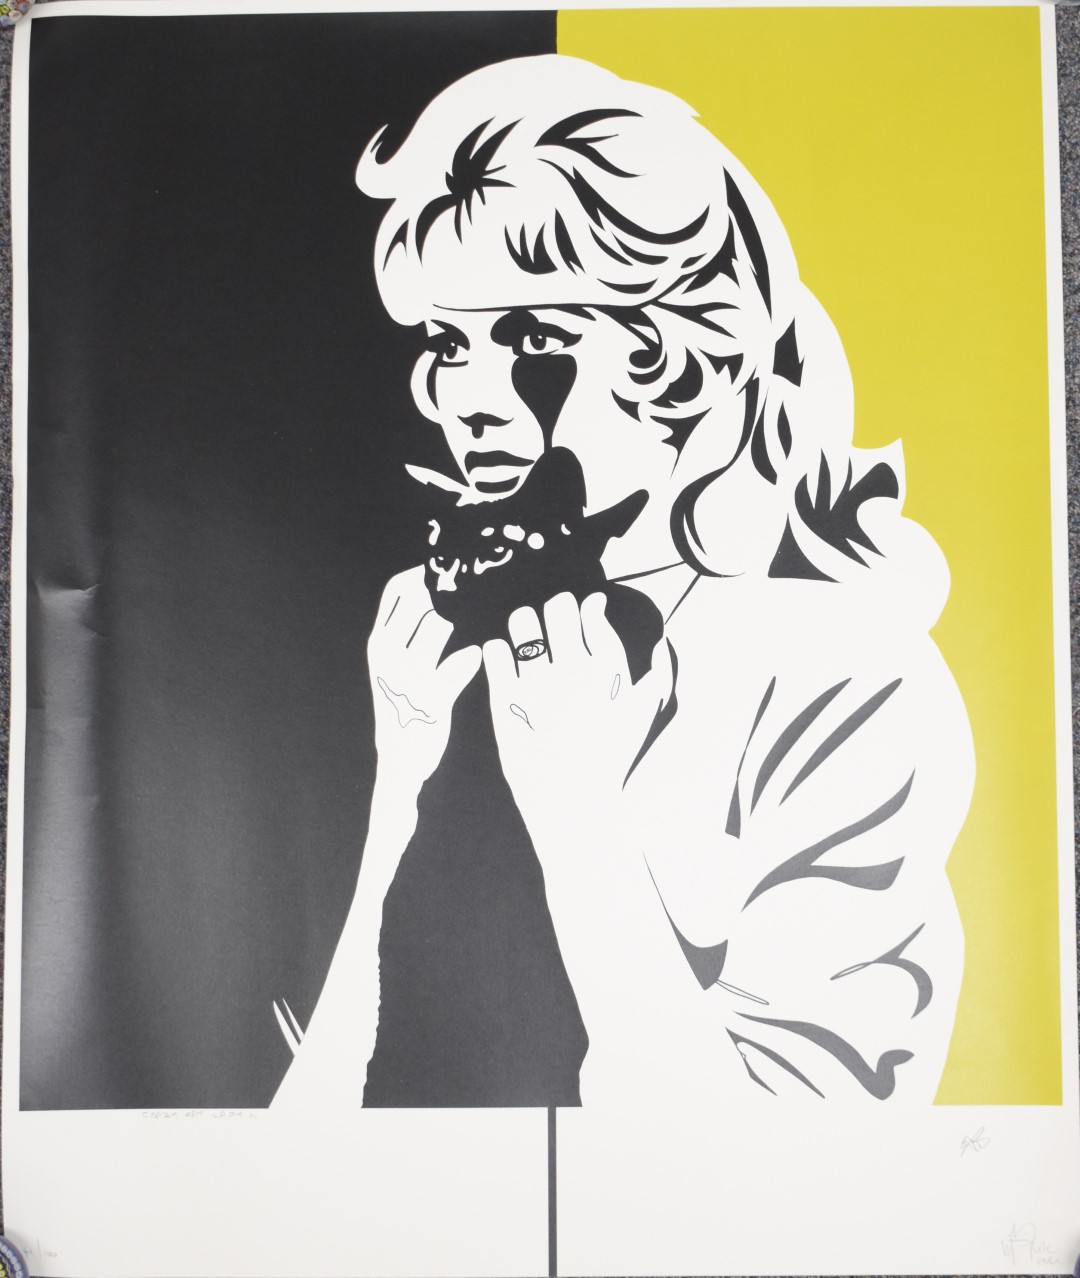 Charles Uzzell Edwards 'Pure Evil' (born 1968) signed limited edition (41/100) screen print 'Crazy